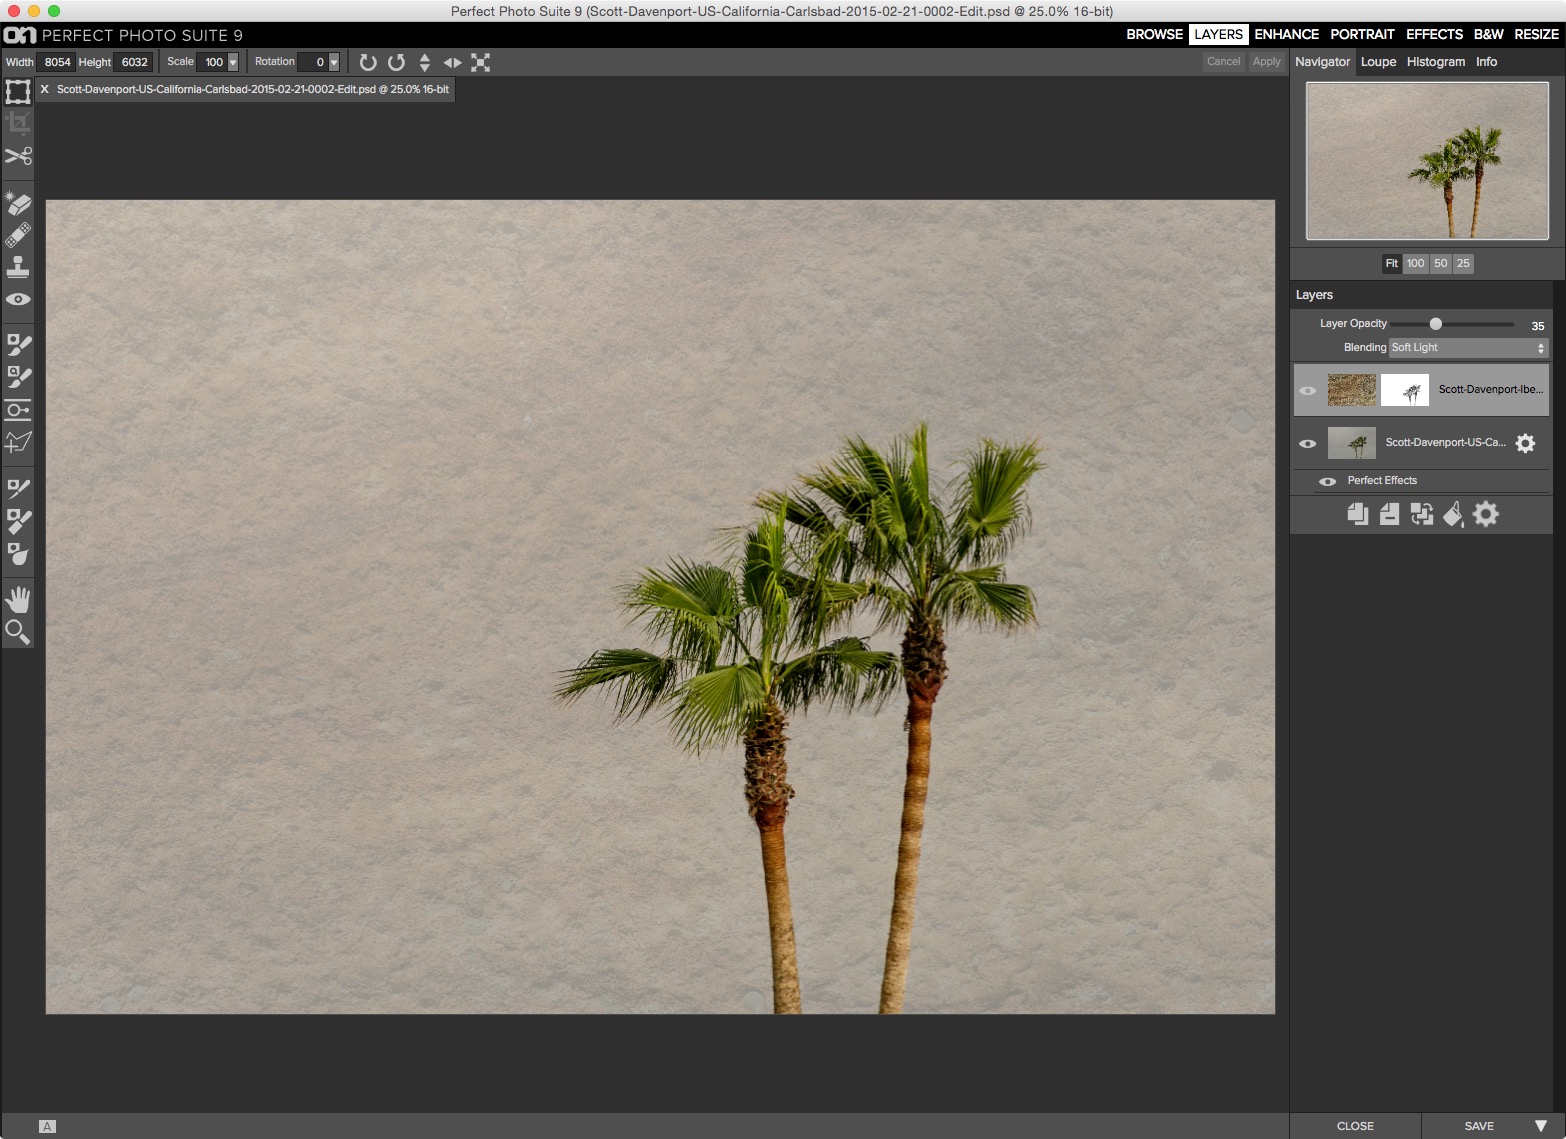 Tip 1: Change Blending Modes and Layer Opacity